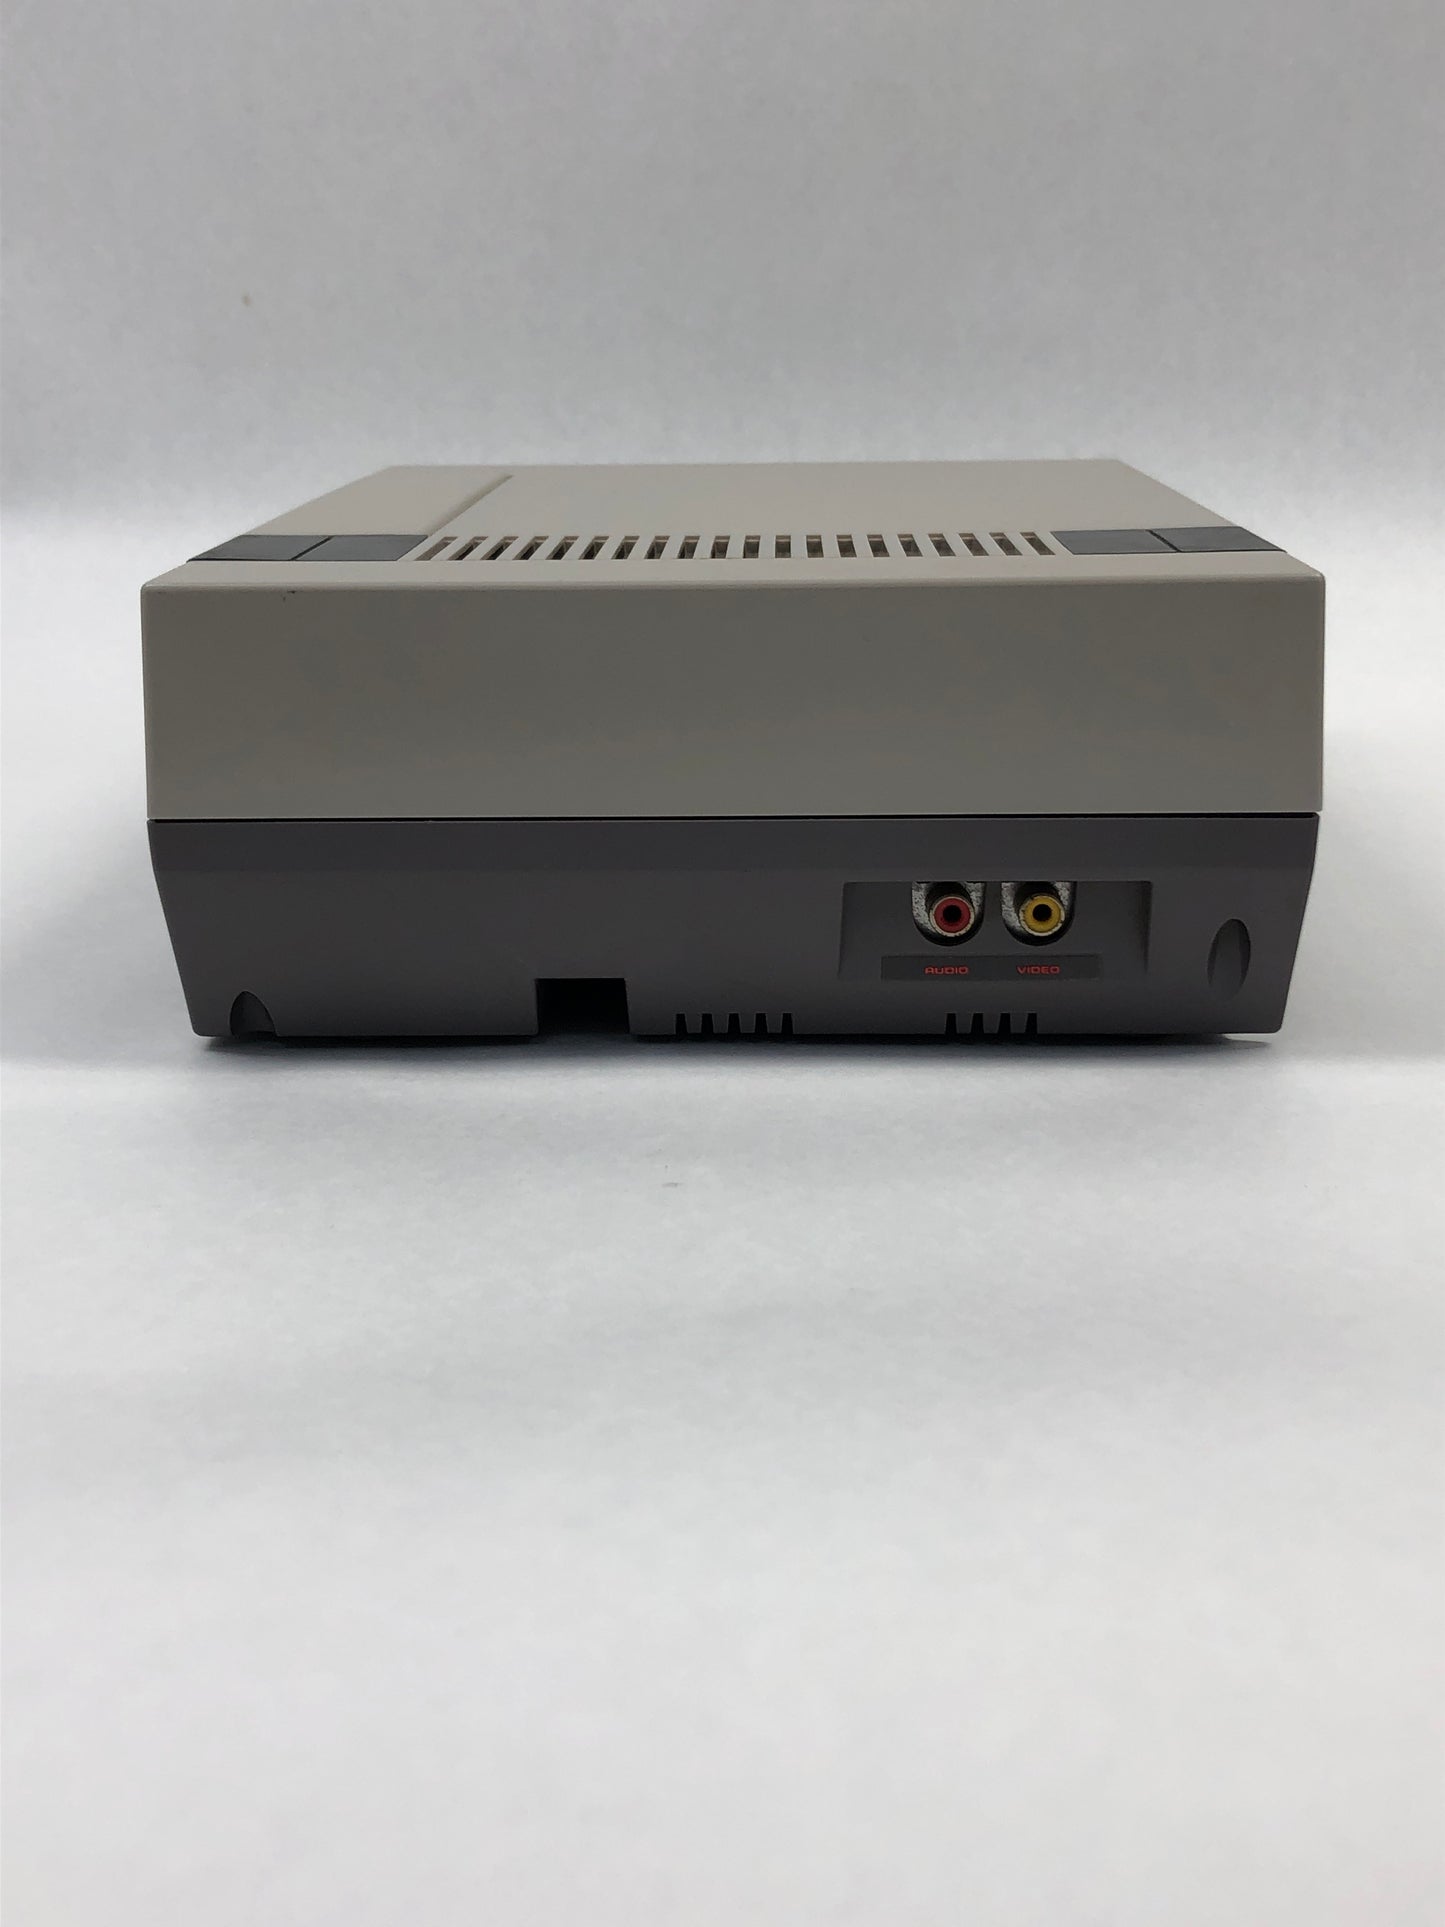 Broken Nintendo Entertainment System Video Game Console Only NES-001